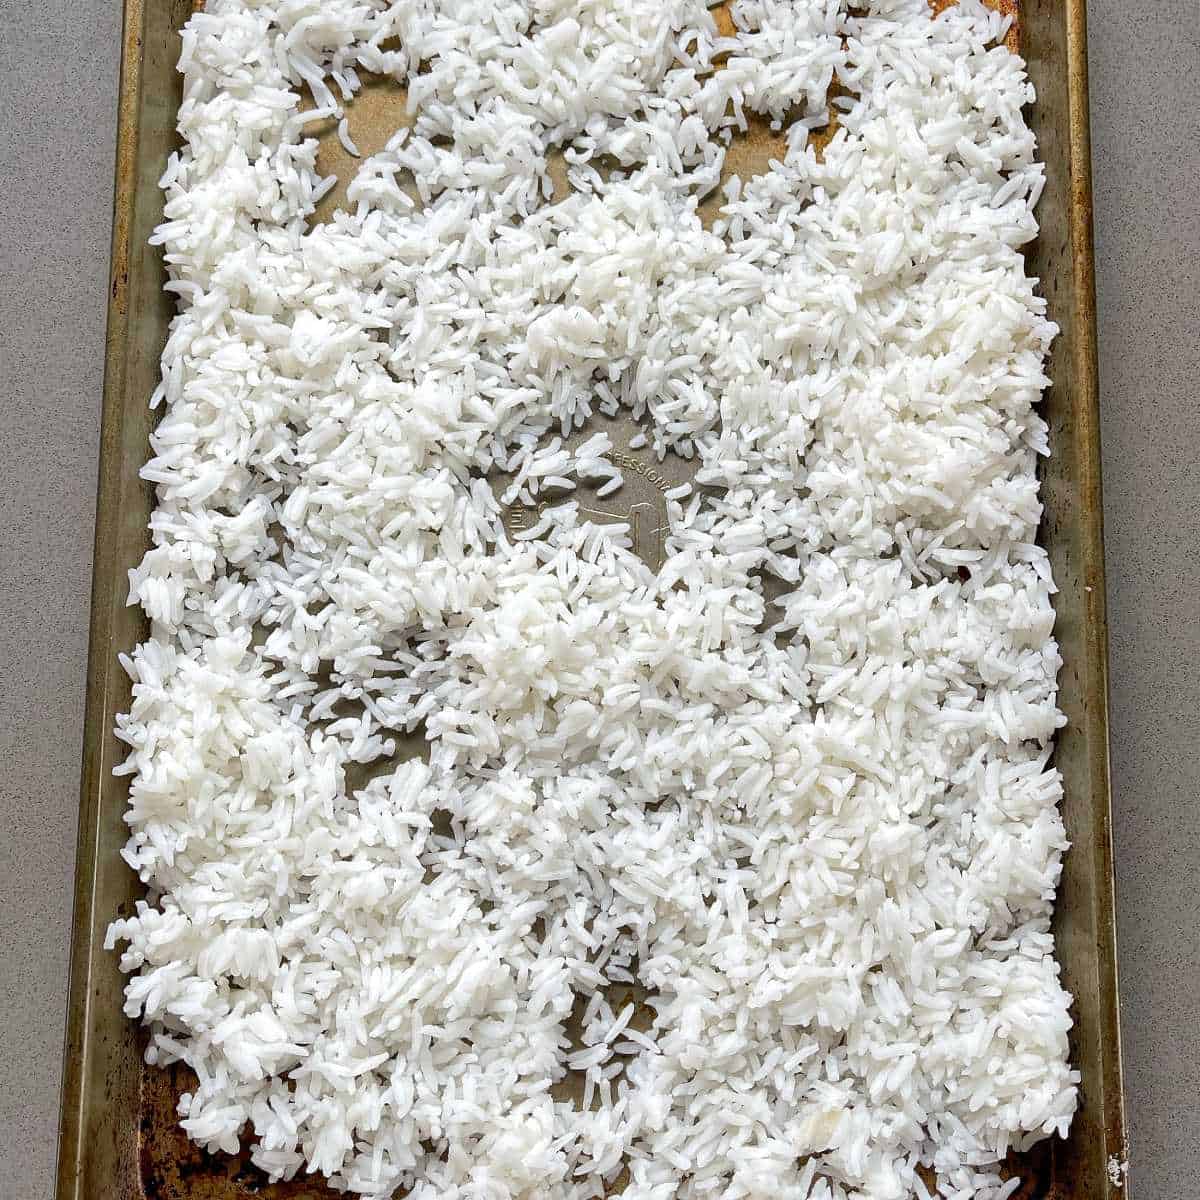 White rice spread out and cooling down on a baking tray.